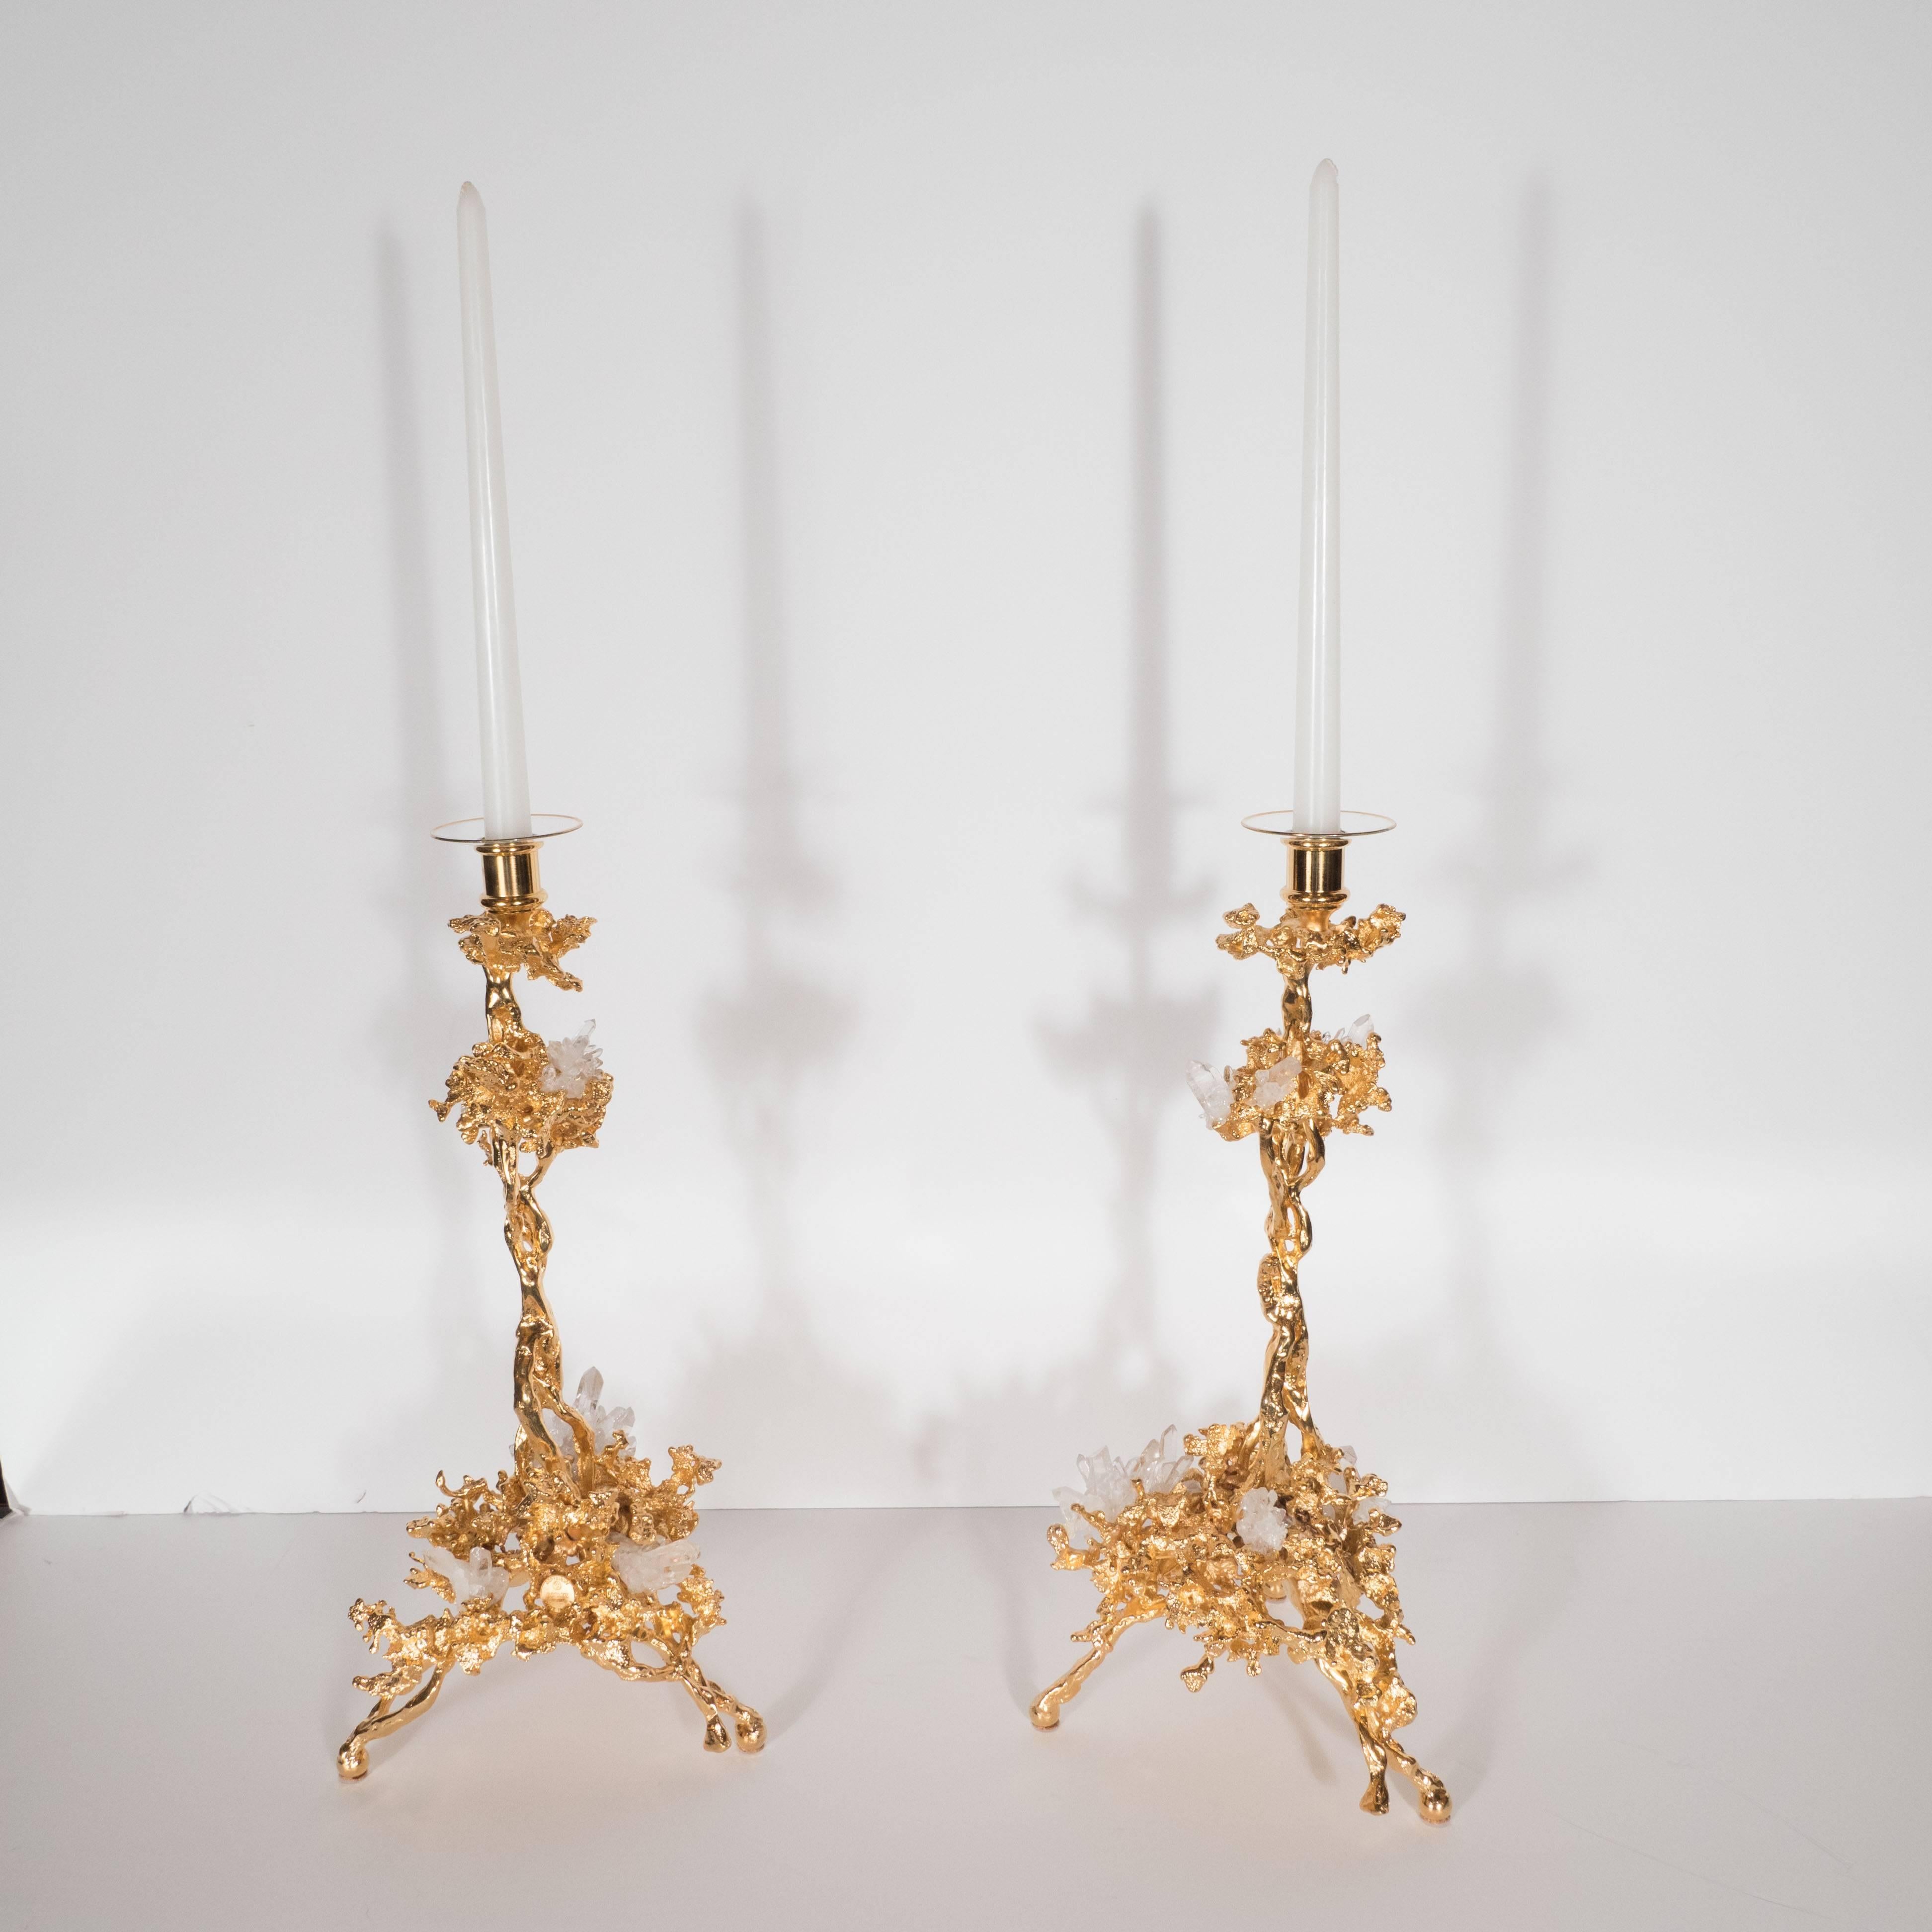 This stunning pair of Mid-Century Modern candlesticks were realized in France, circa 1970 by the esteemed artisan Claude Victor Boeltz. They offer an exploded form sculpted, by hand, and cast in bronze, consisting of a single arm and three feet